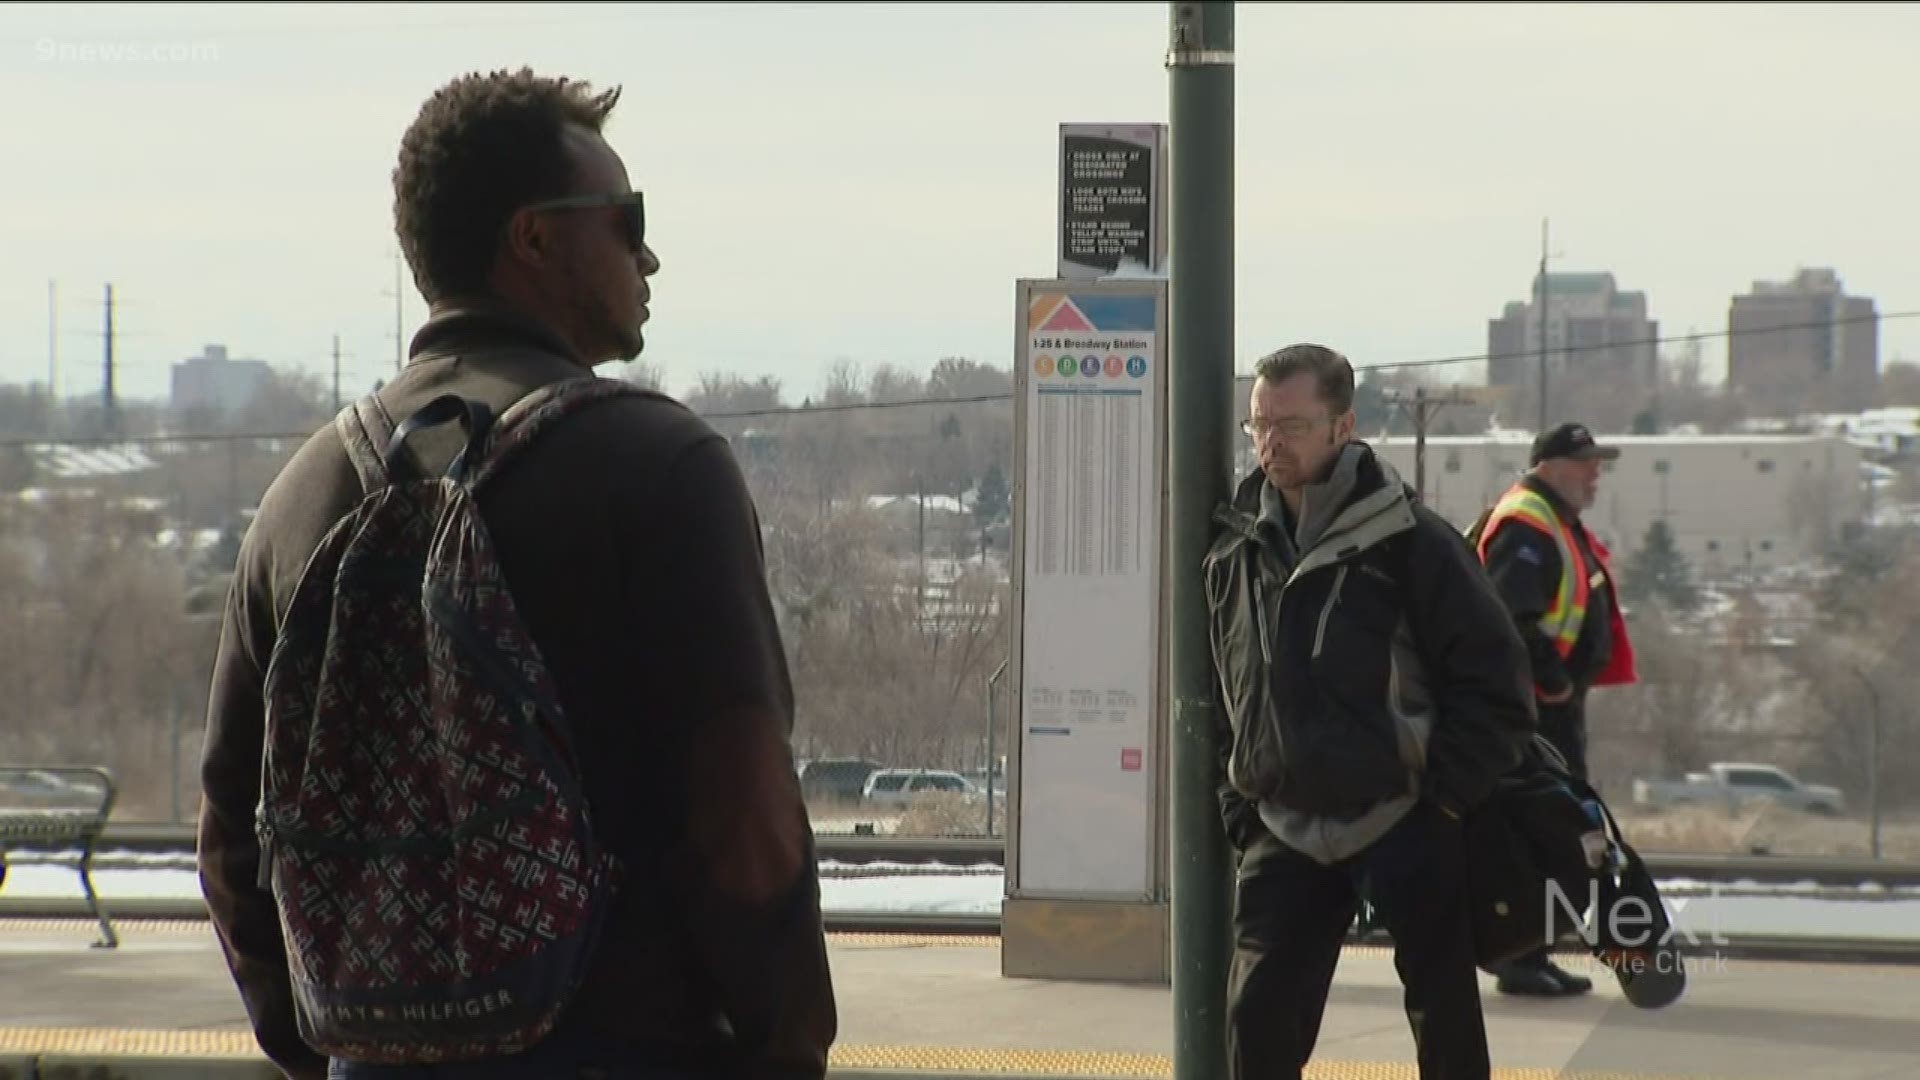 If RTD can't run its buses and trains as scheduled due to staffing shortages, riders are asking if they could at least be warned.